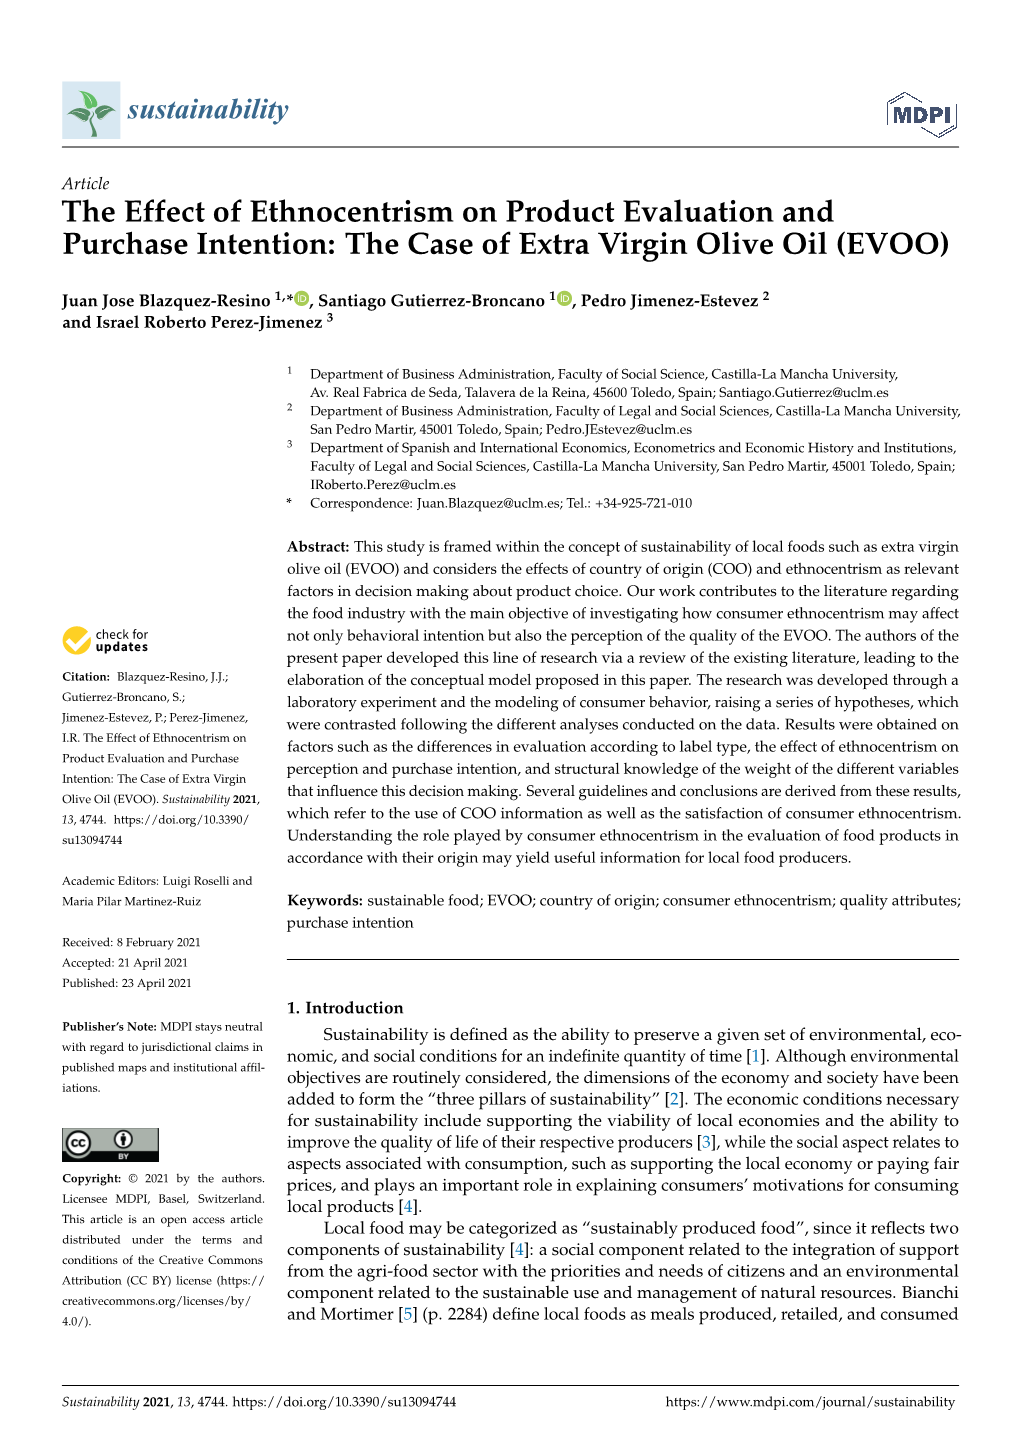 The Case of Extra Virgin Olive Oil (EVOO)